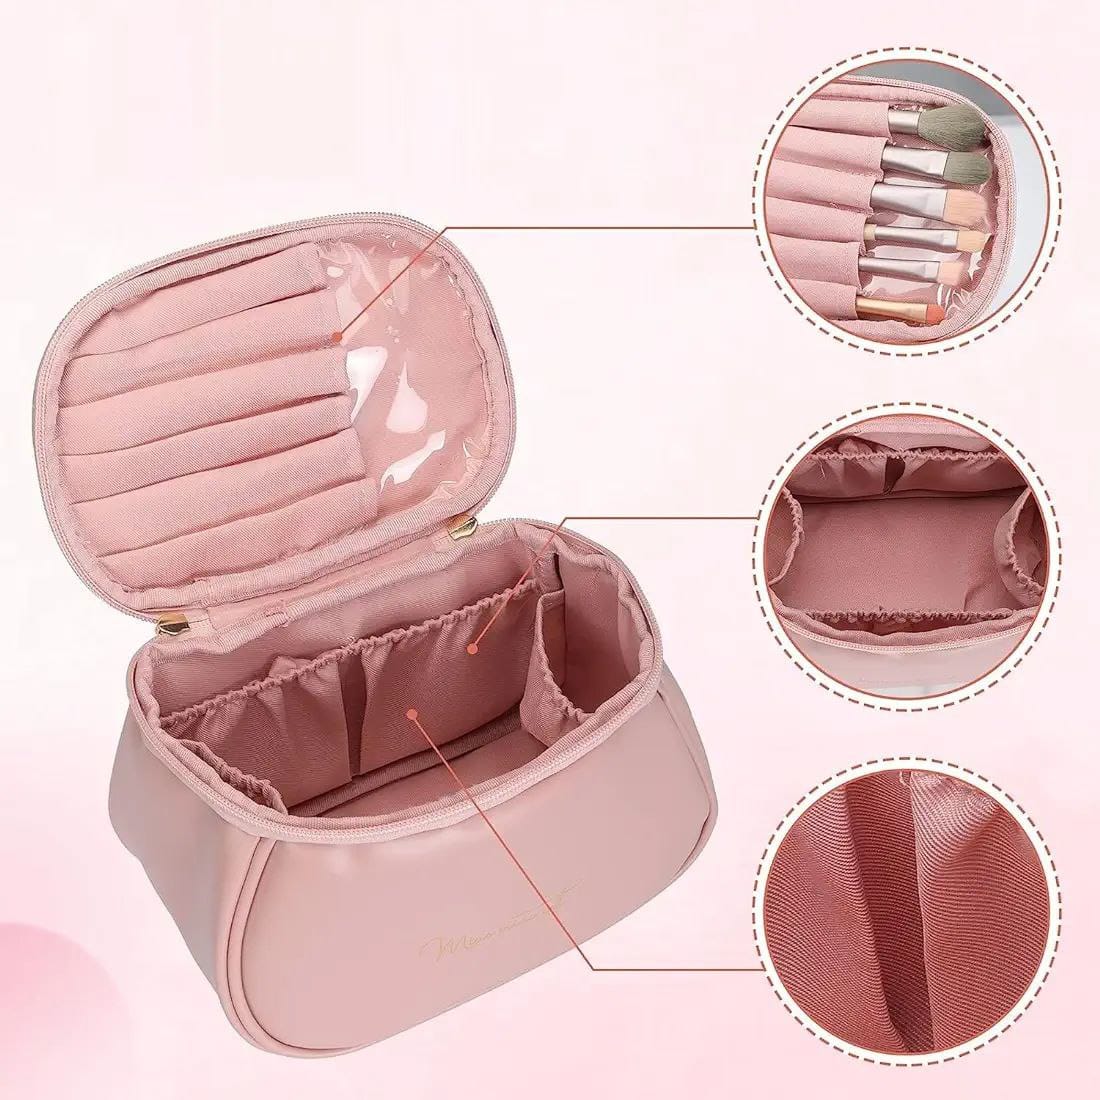 Cute Portable Lightweight Waterproof Travel Vanity Bag with Large Opening Brush Compartment